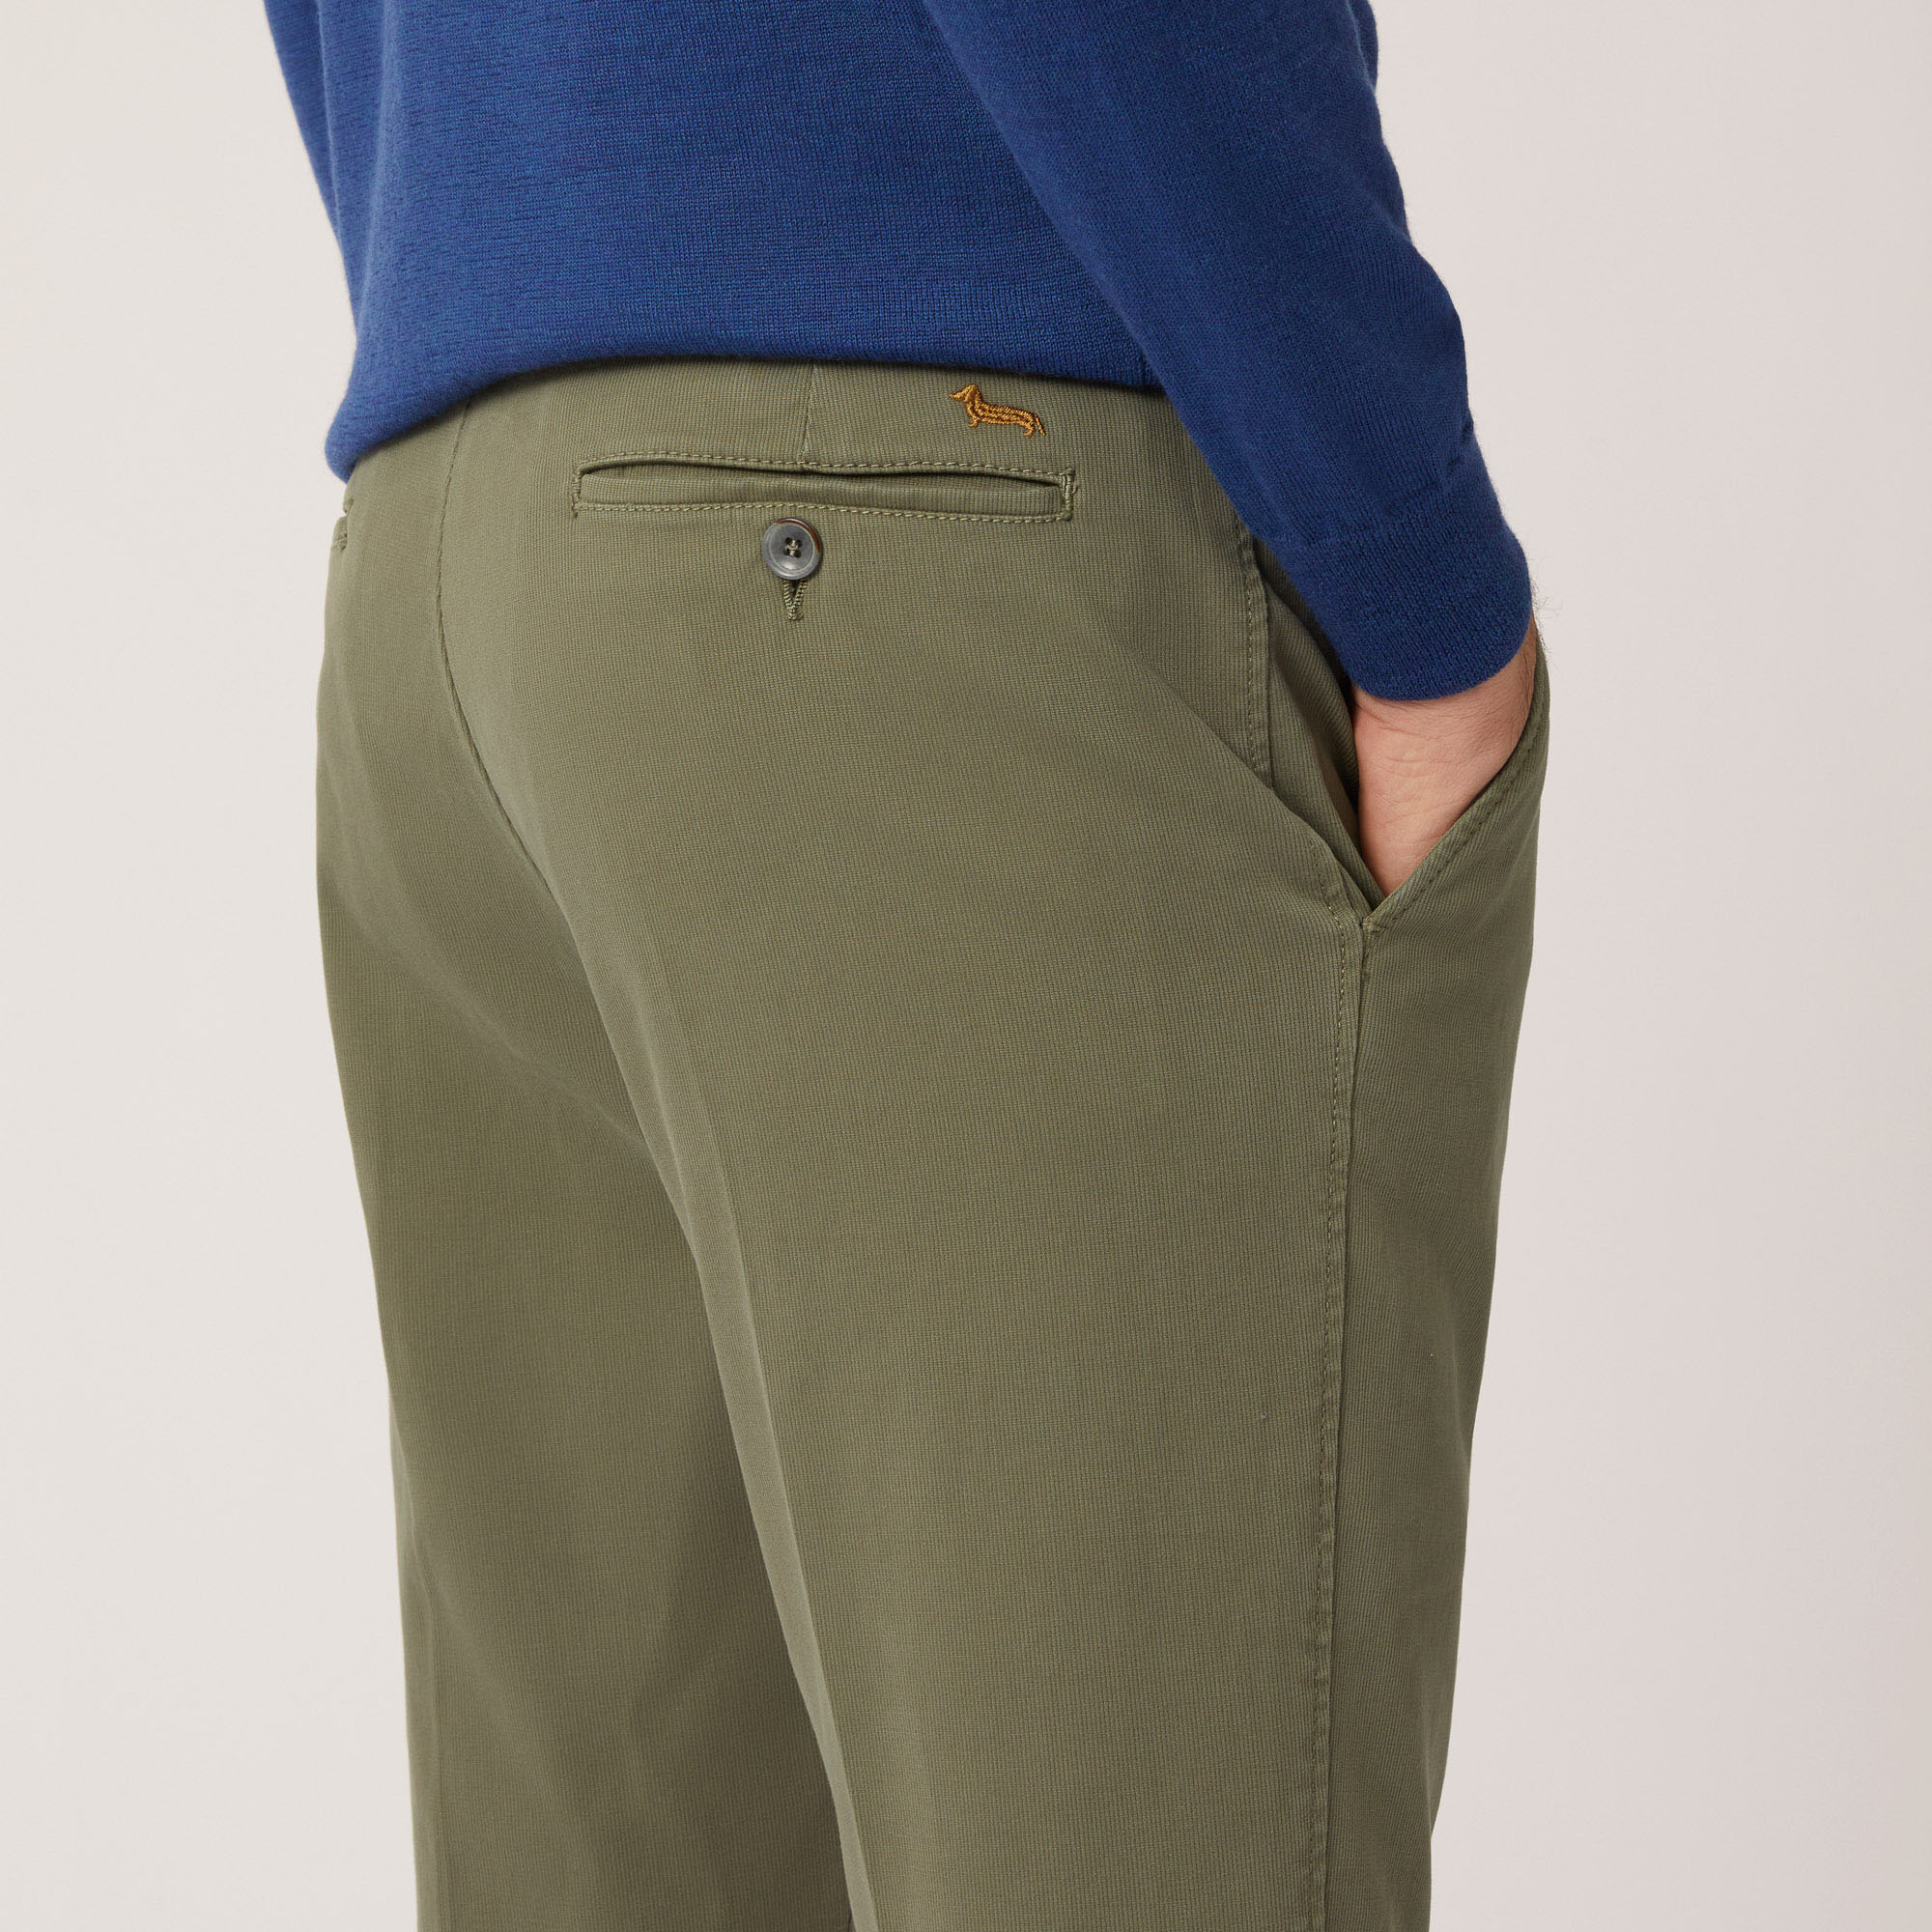 Pantalone Chino Narrow In Cotone Stretch, Verde Oliva, large image number 2